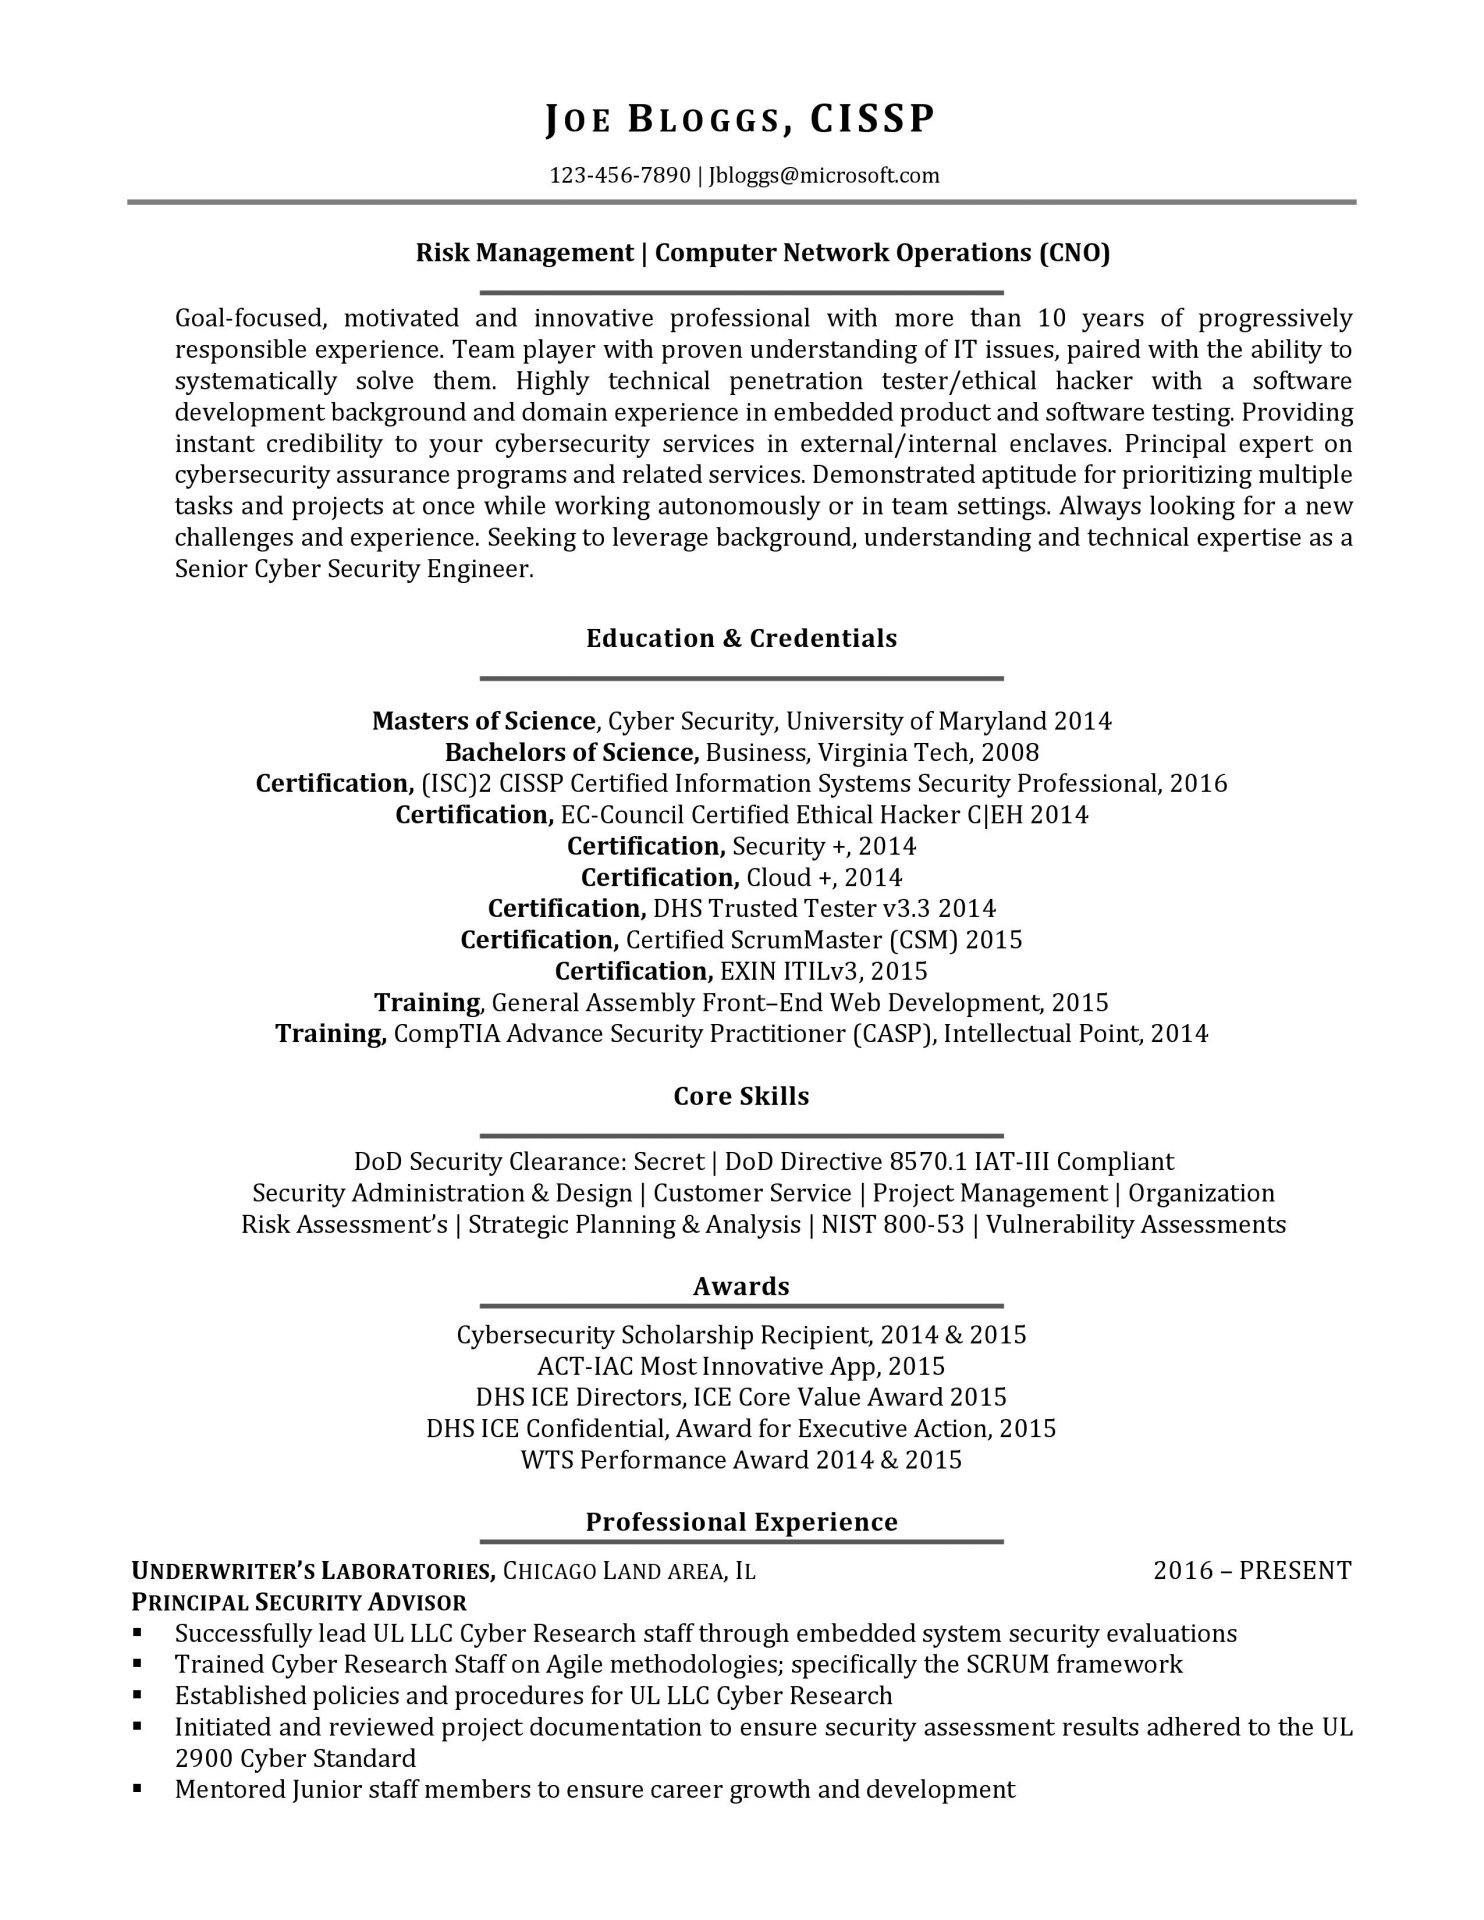 Sample Resume with Comp Tia Credentials Sample Inspiring Resumes – Intellectual Point